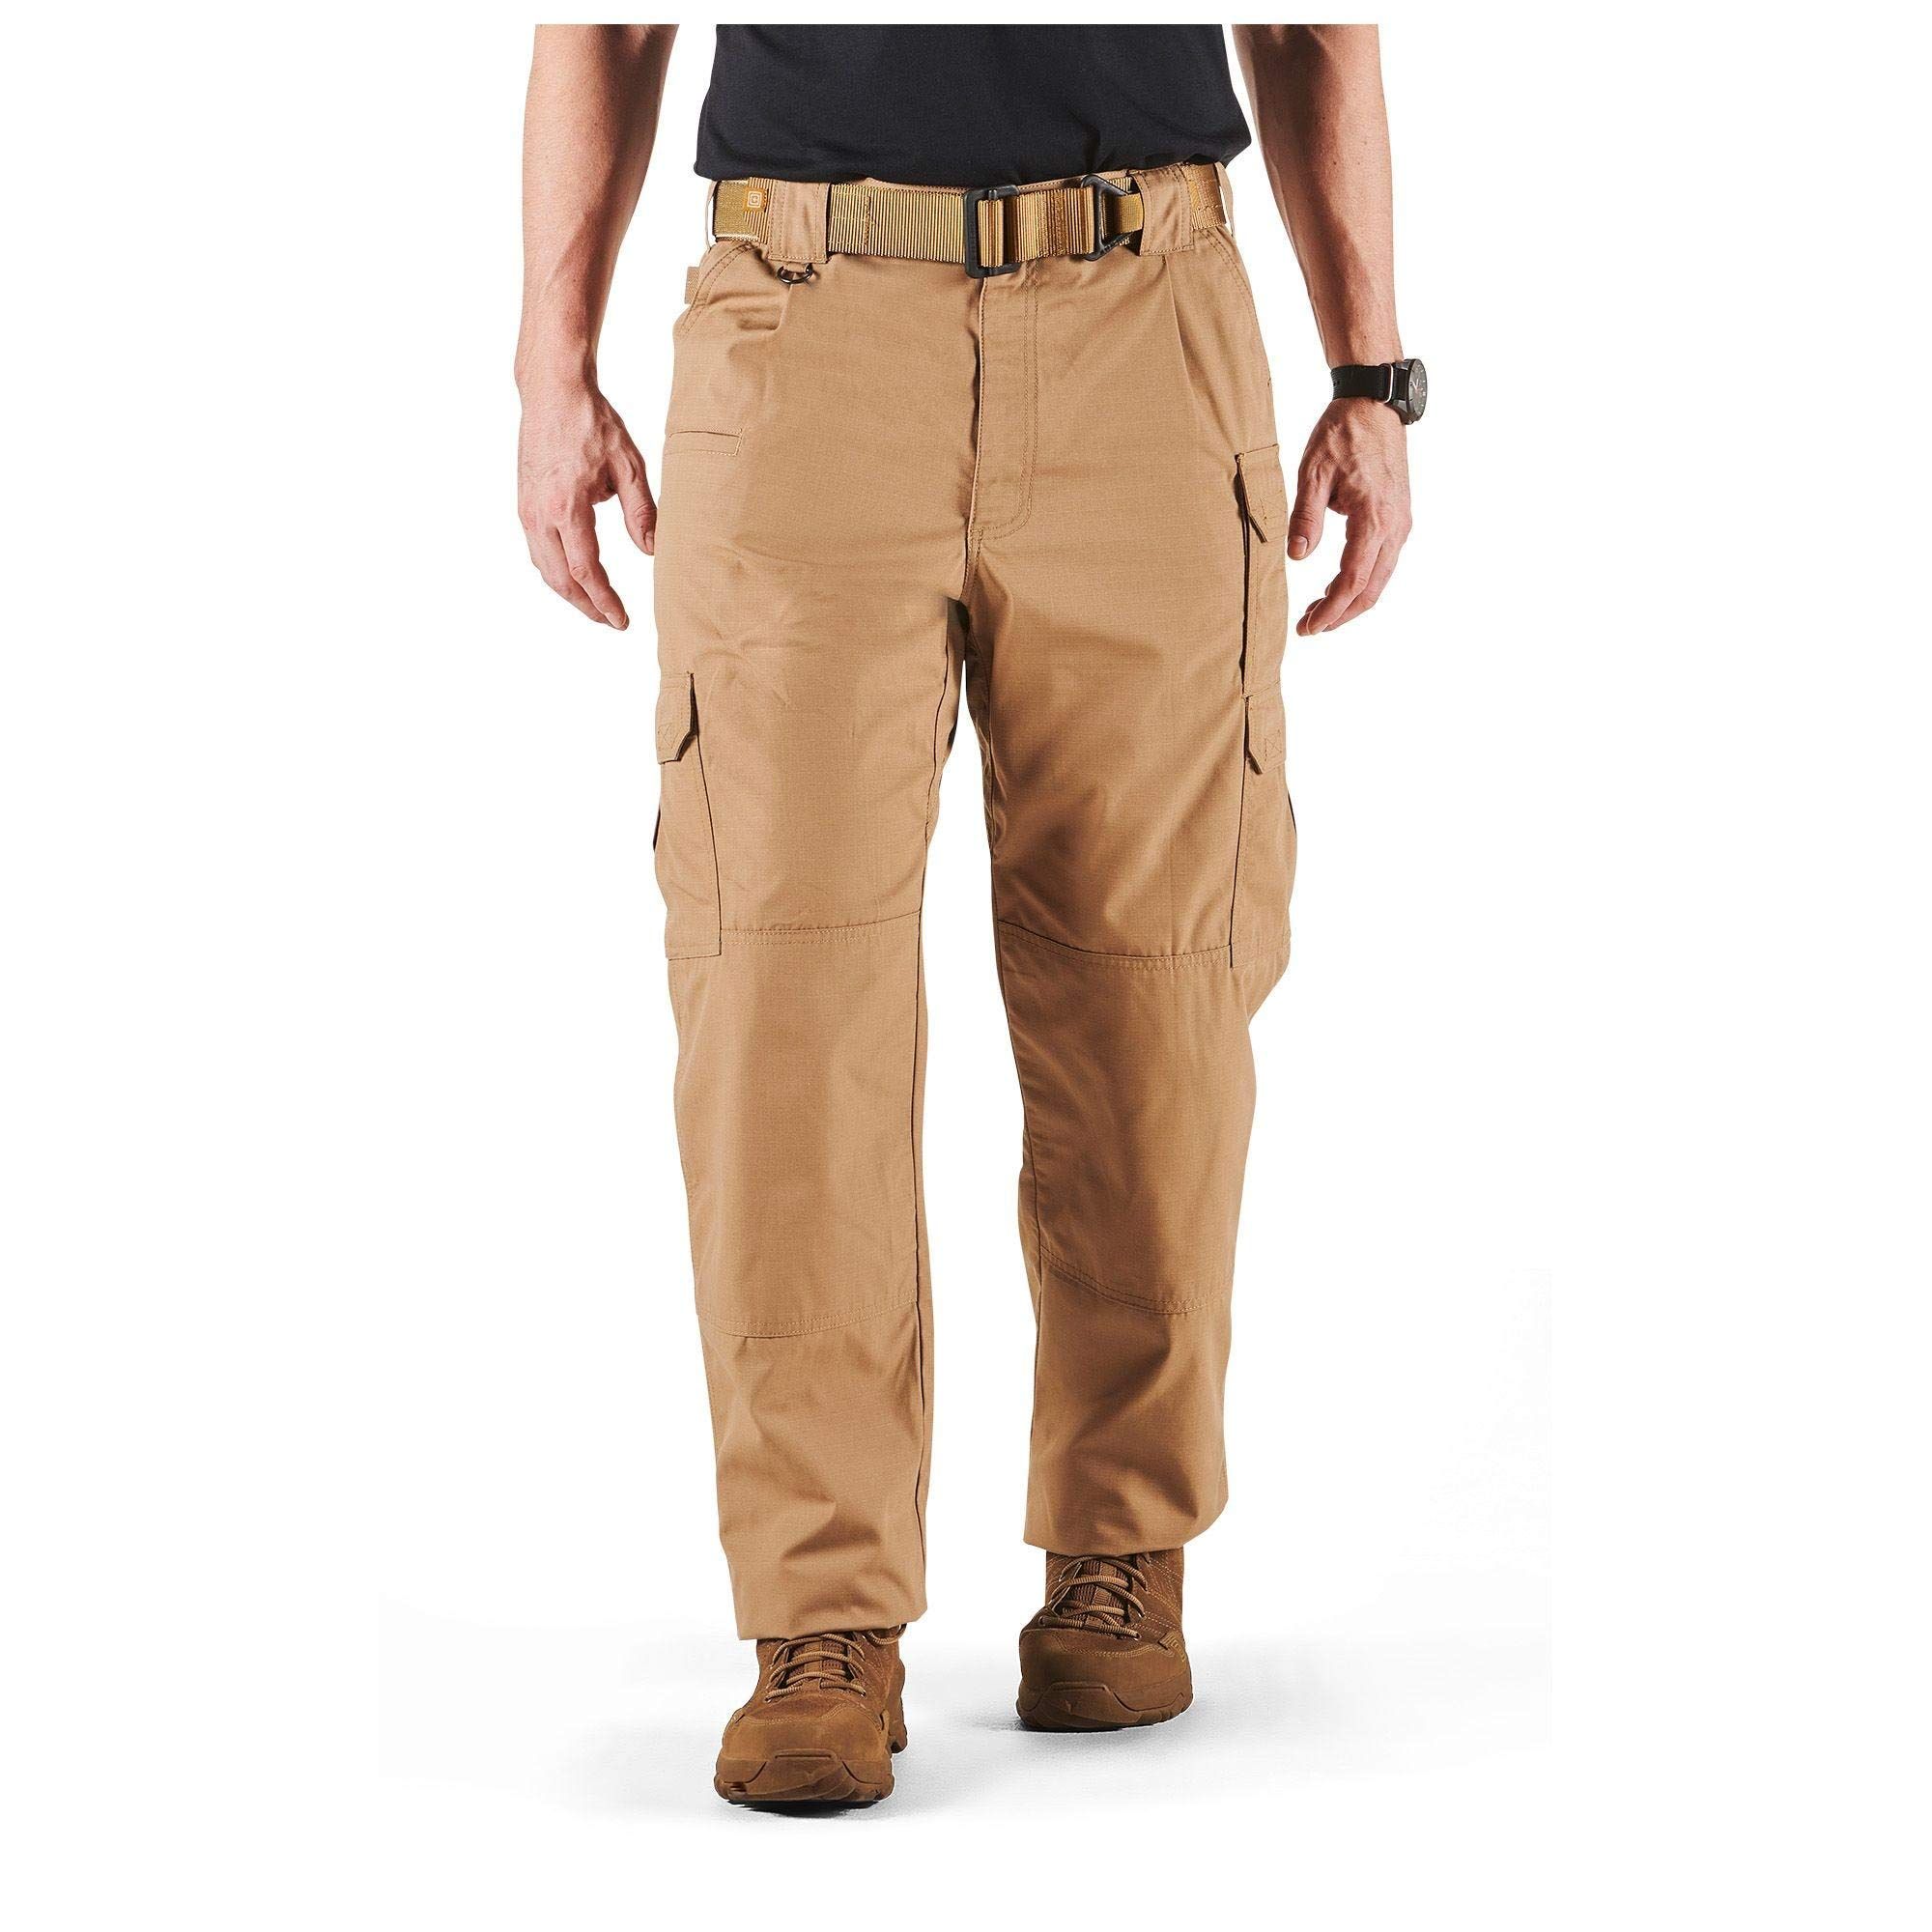 10 Best Construction Work Pants Reviews in 2023  ElectronicsHub